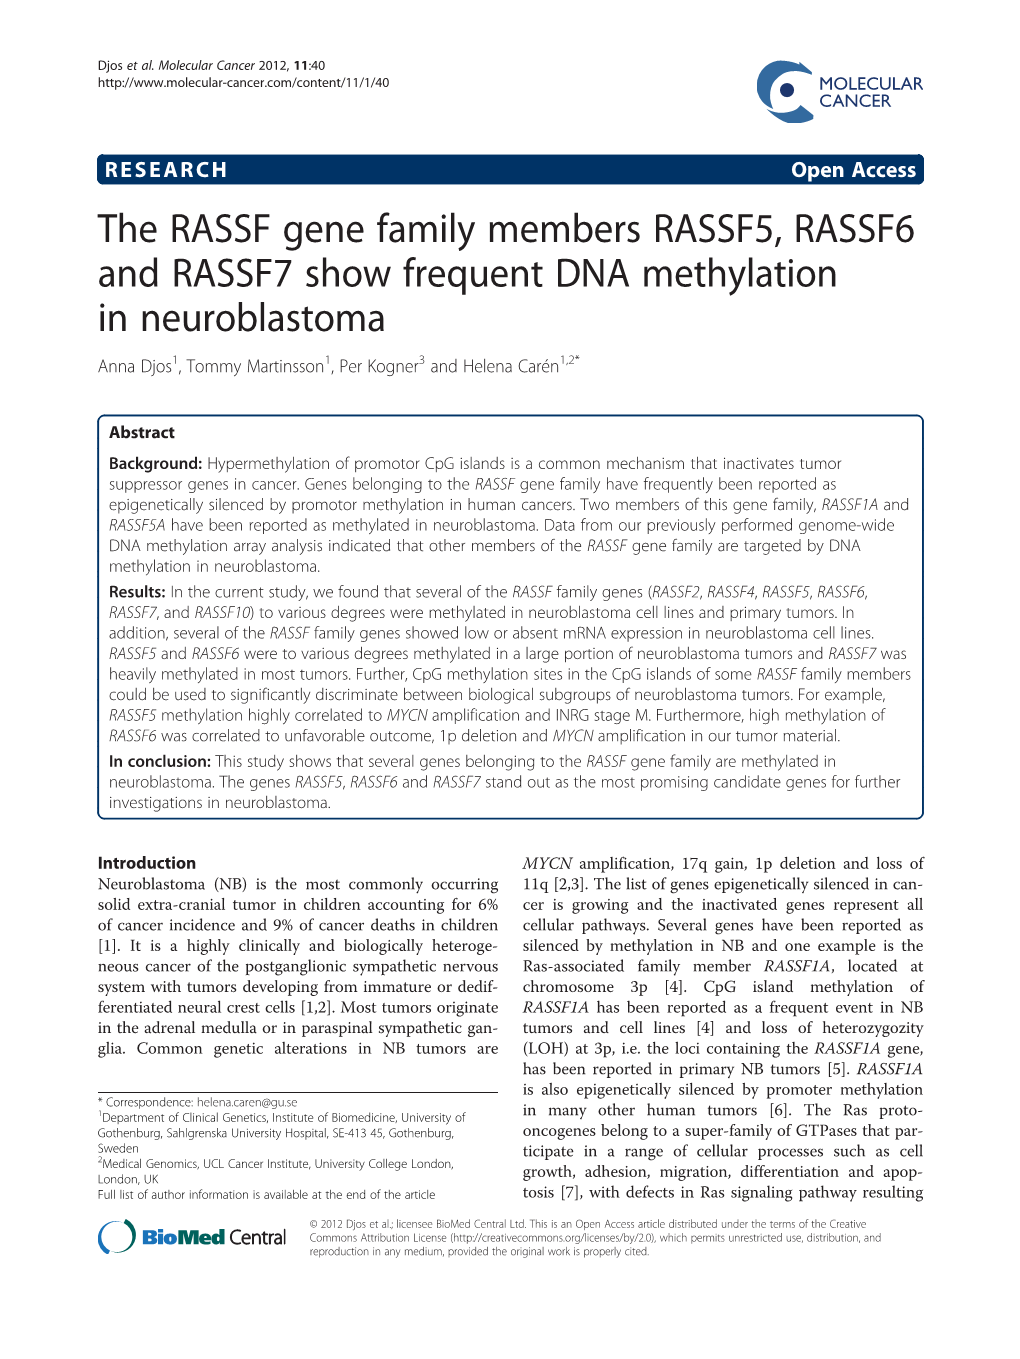 The RASSF Gene Family Members RASSF5, RASSF6 and RASSF7 Show Frequent DNA Methylation in Neuroblastoma Anna Djos1, Tommy Martinsson1, Per Kogner3 and Helena Carén1,2*